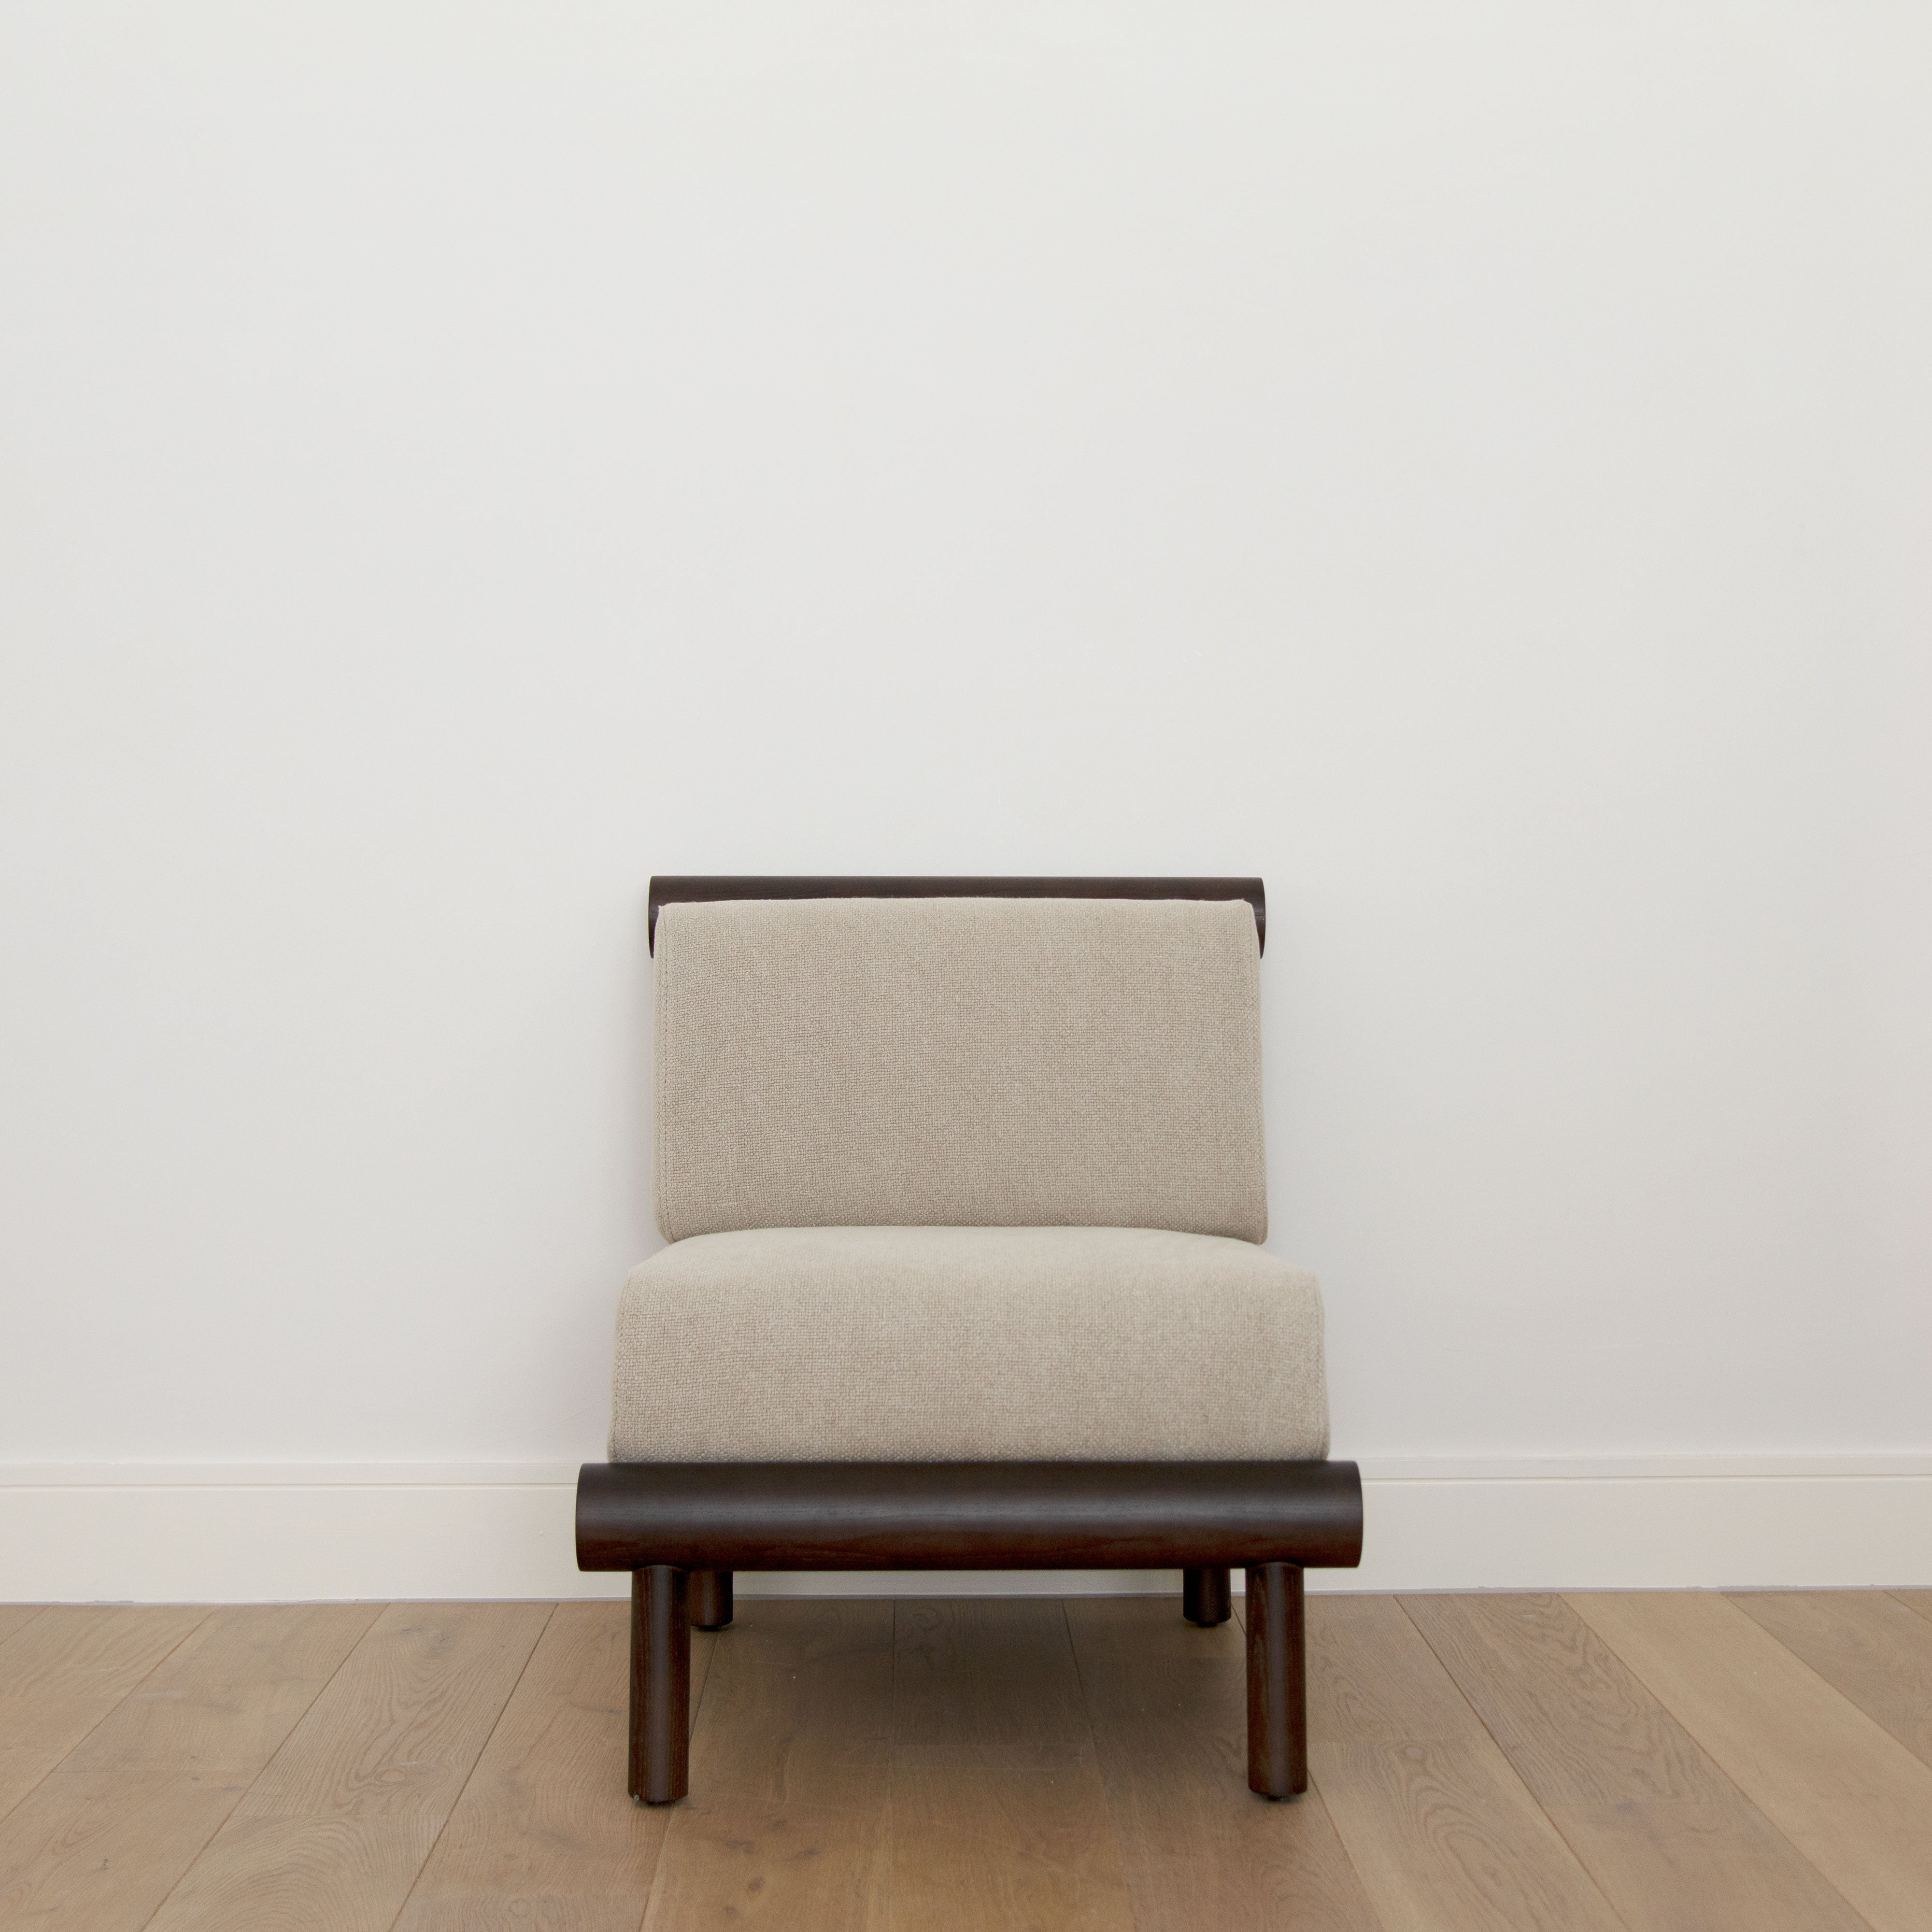 Front view of the Khayni Oren in Soft Clay lounge chair